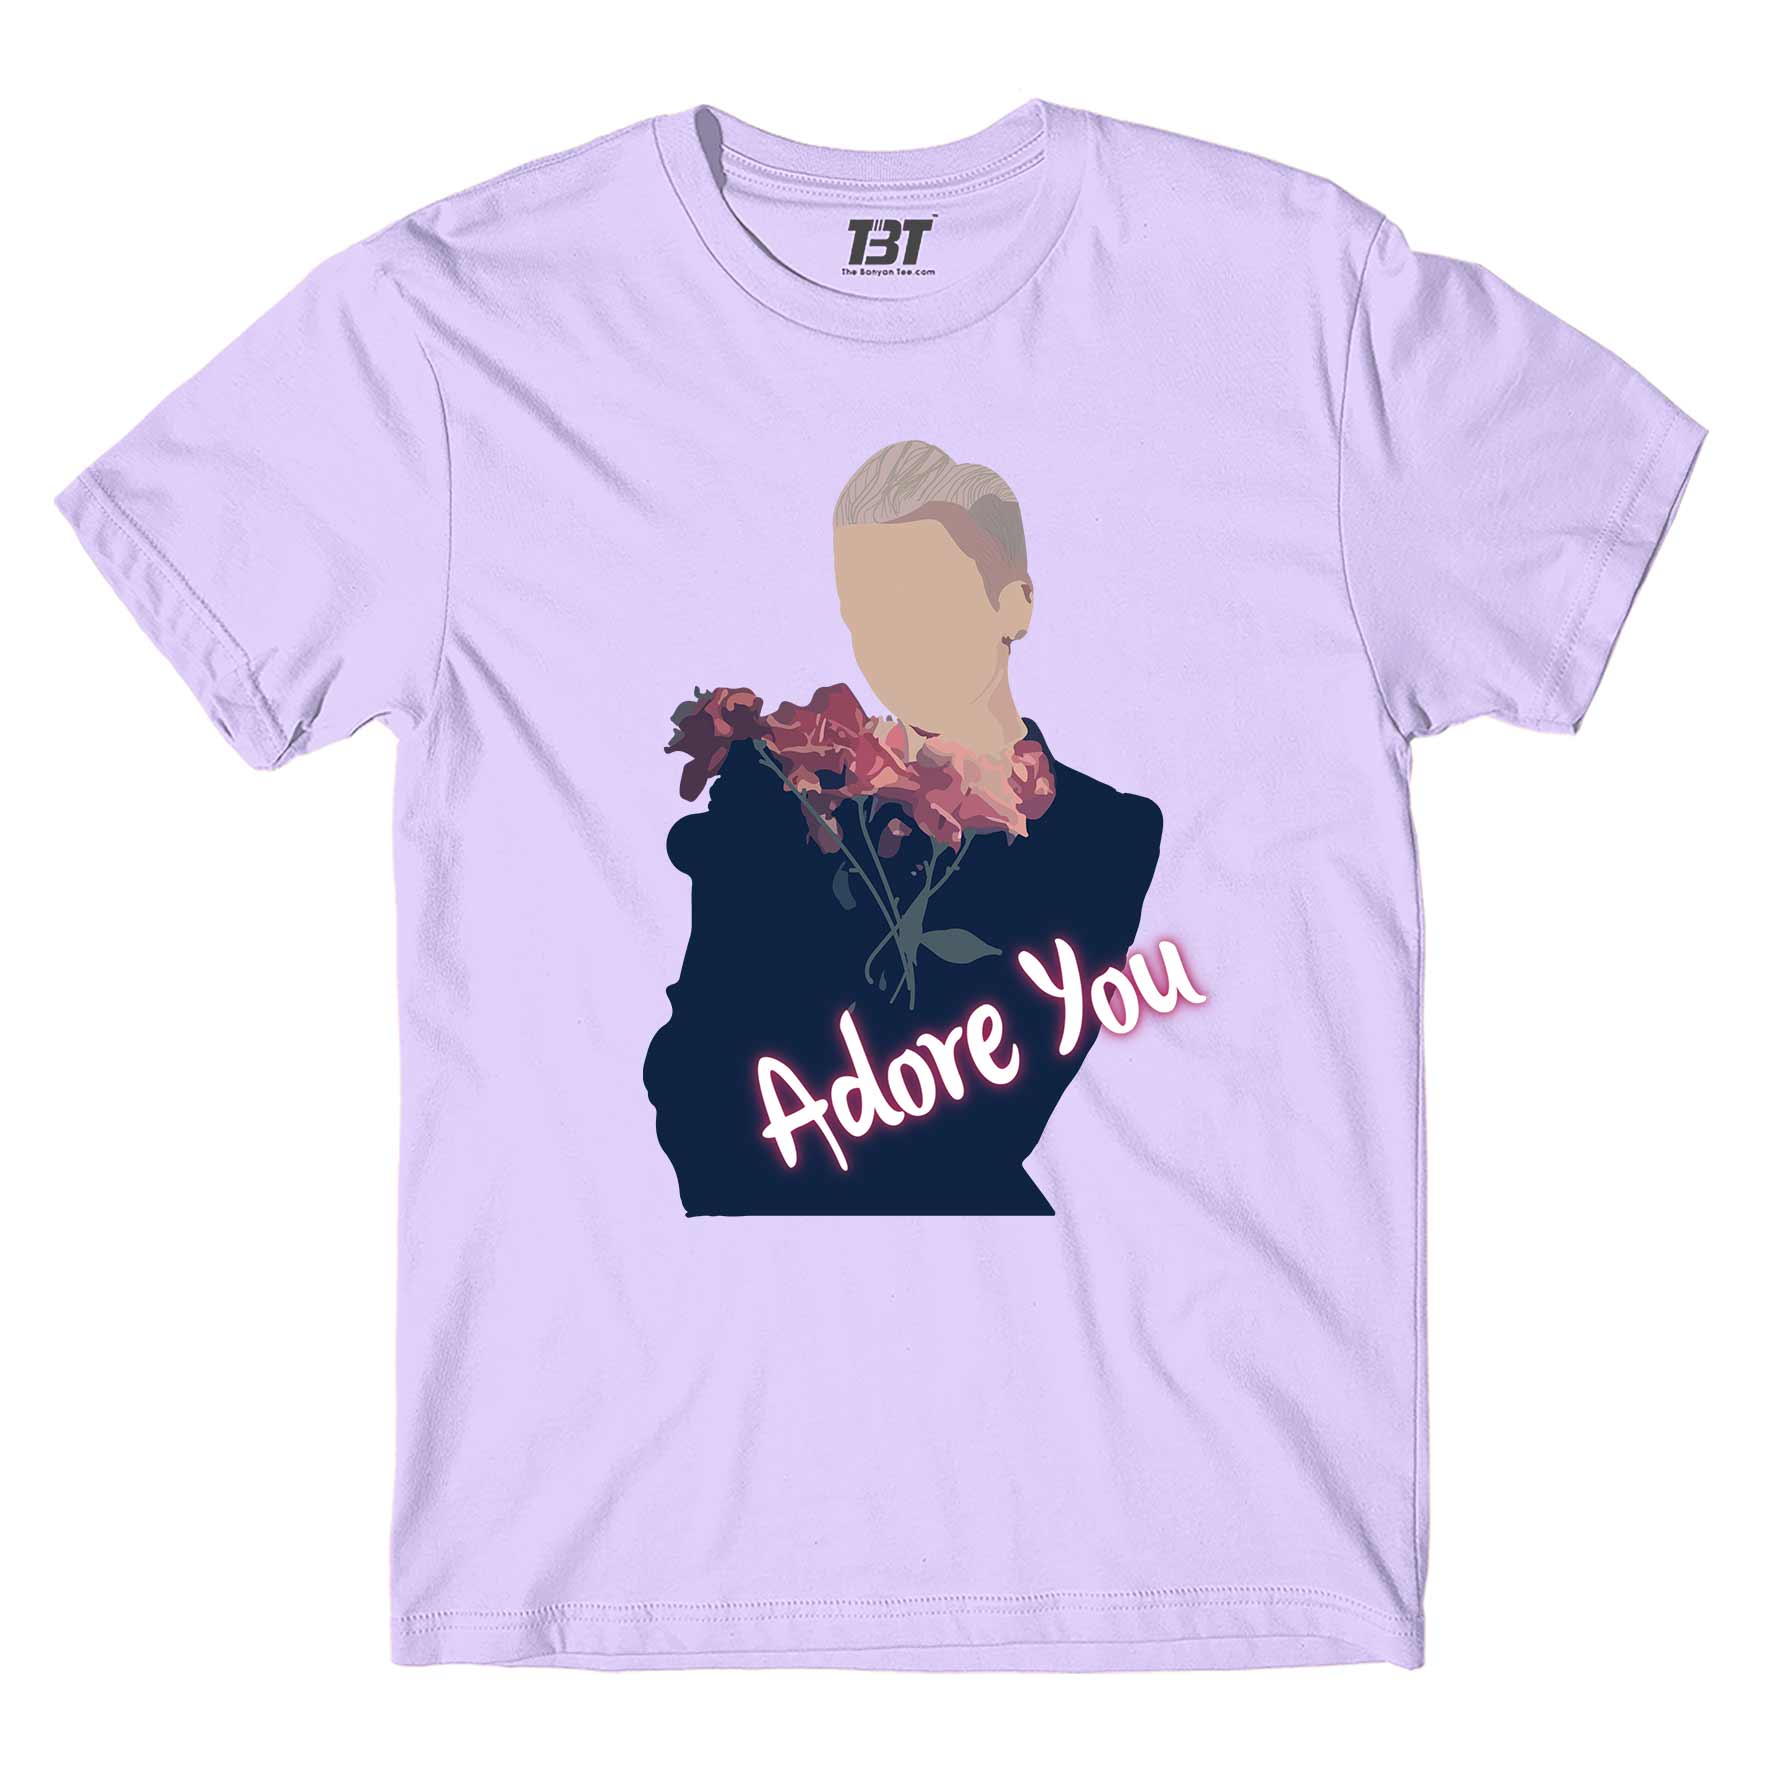 miley cyrus adore you t-shirt music band buy online usa united states the banyan tee tbt men women girls boys unisex lavender